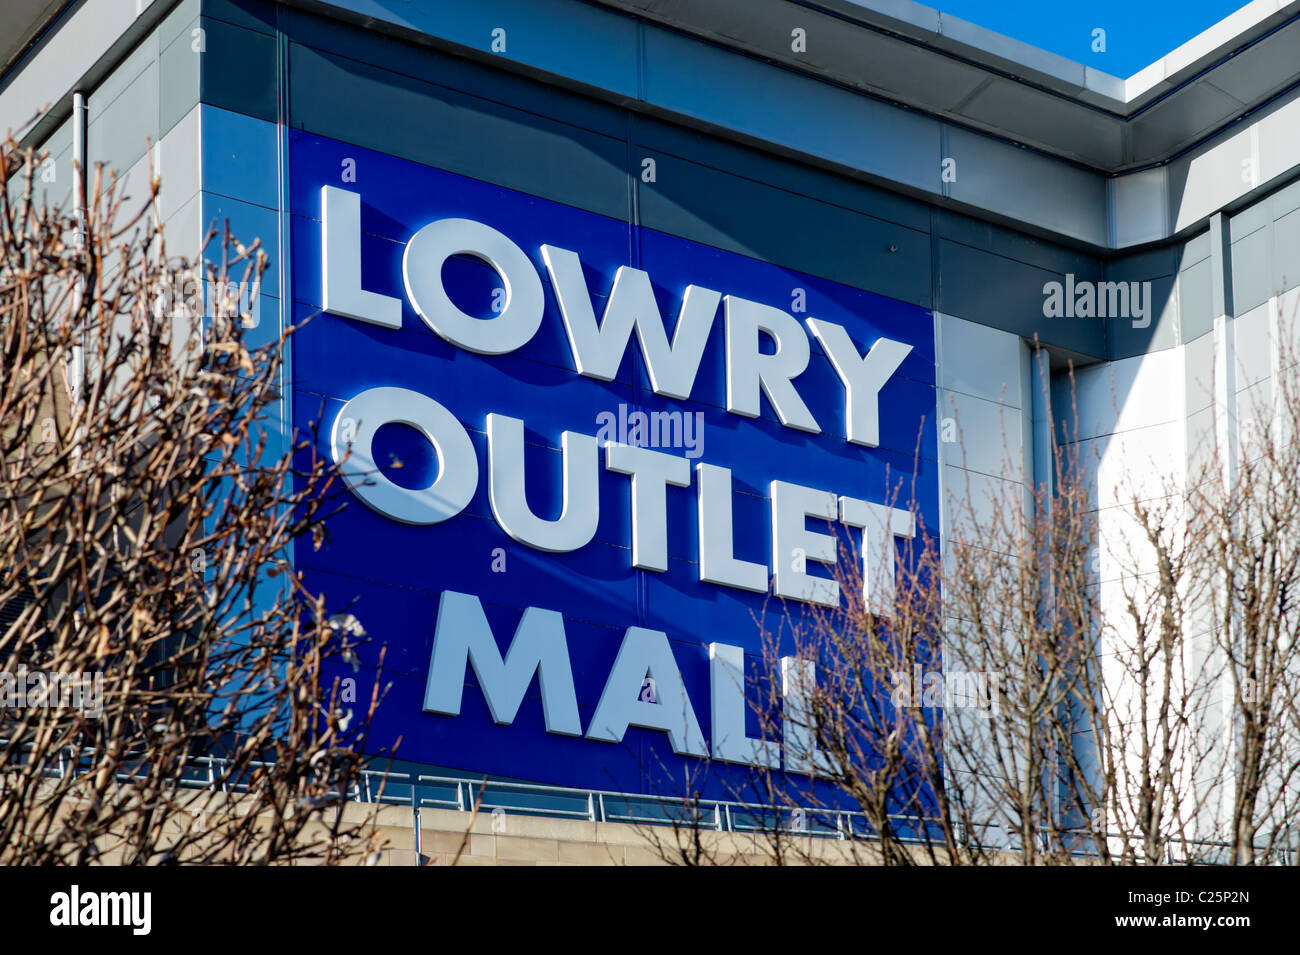 Sign on the Lowry Outlet Mall in Salford Quays Stock Photo